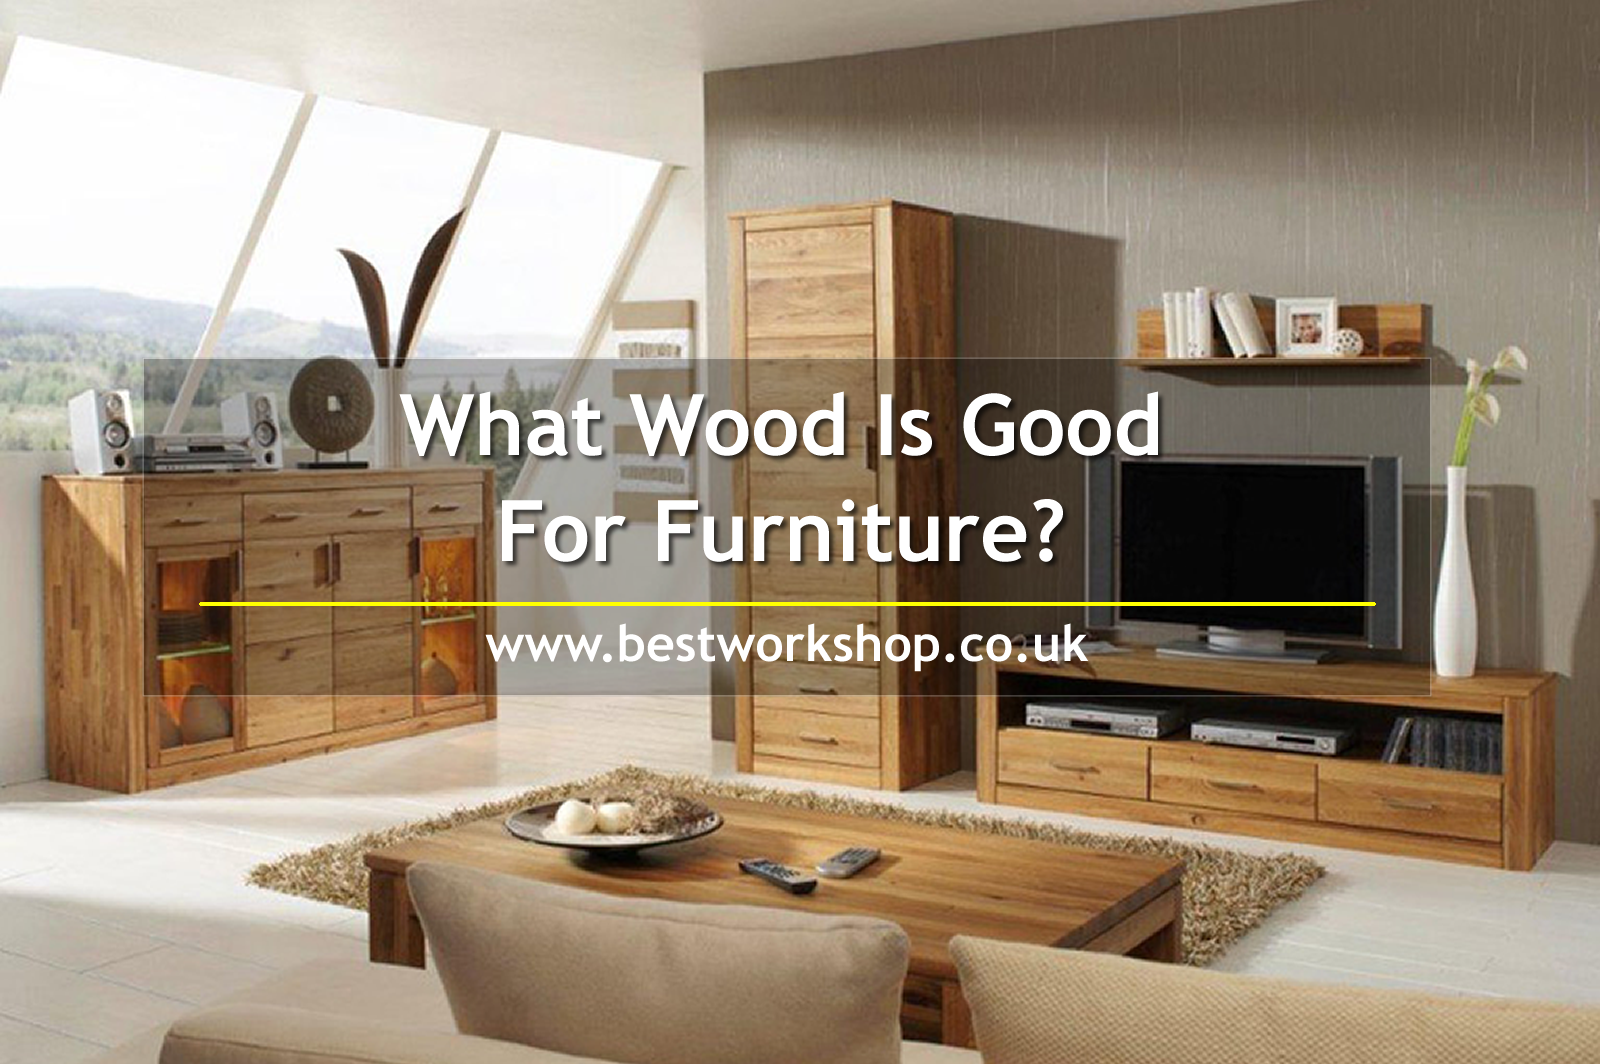 What Wood Is Good For Furniture?